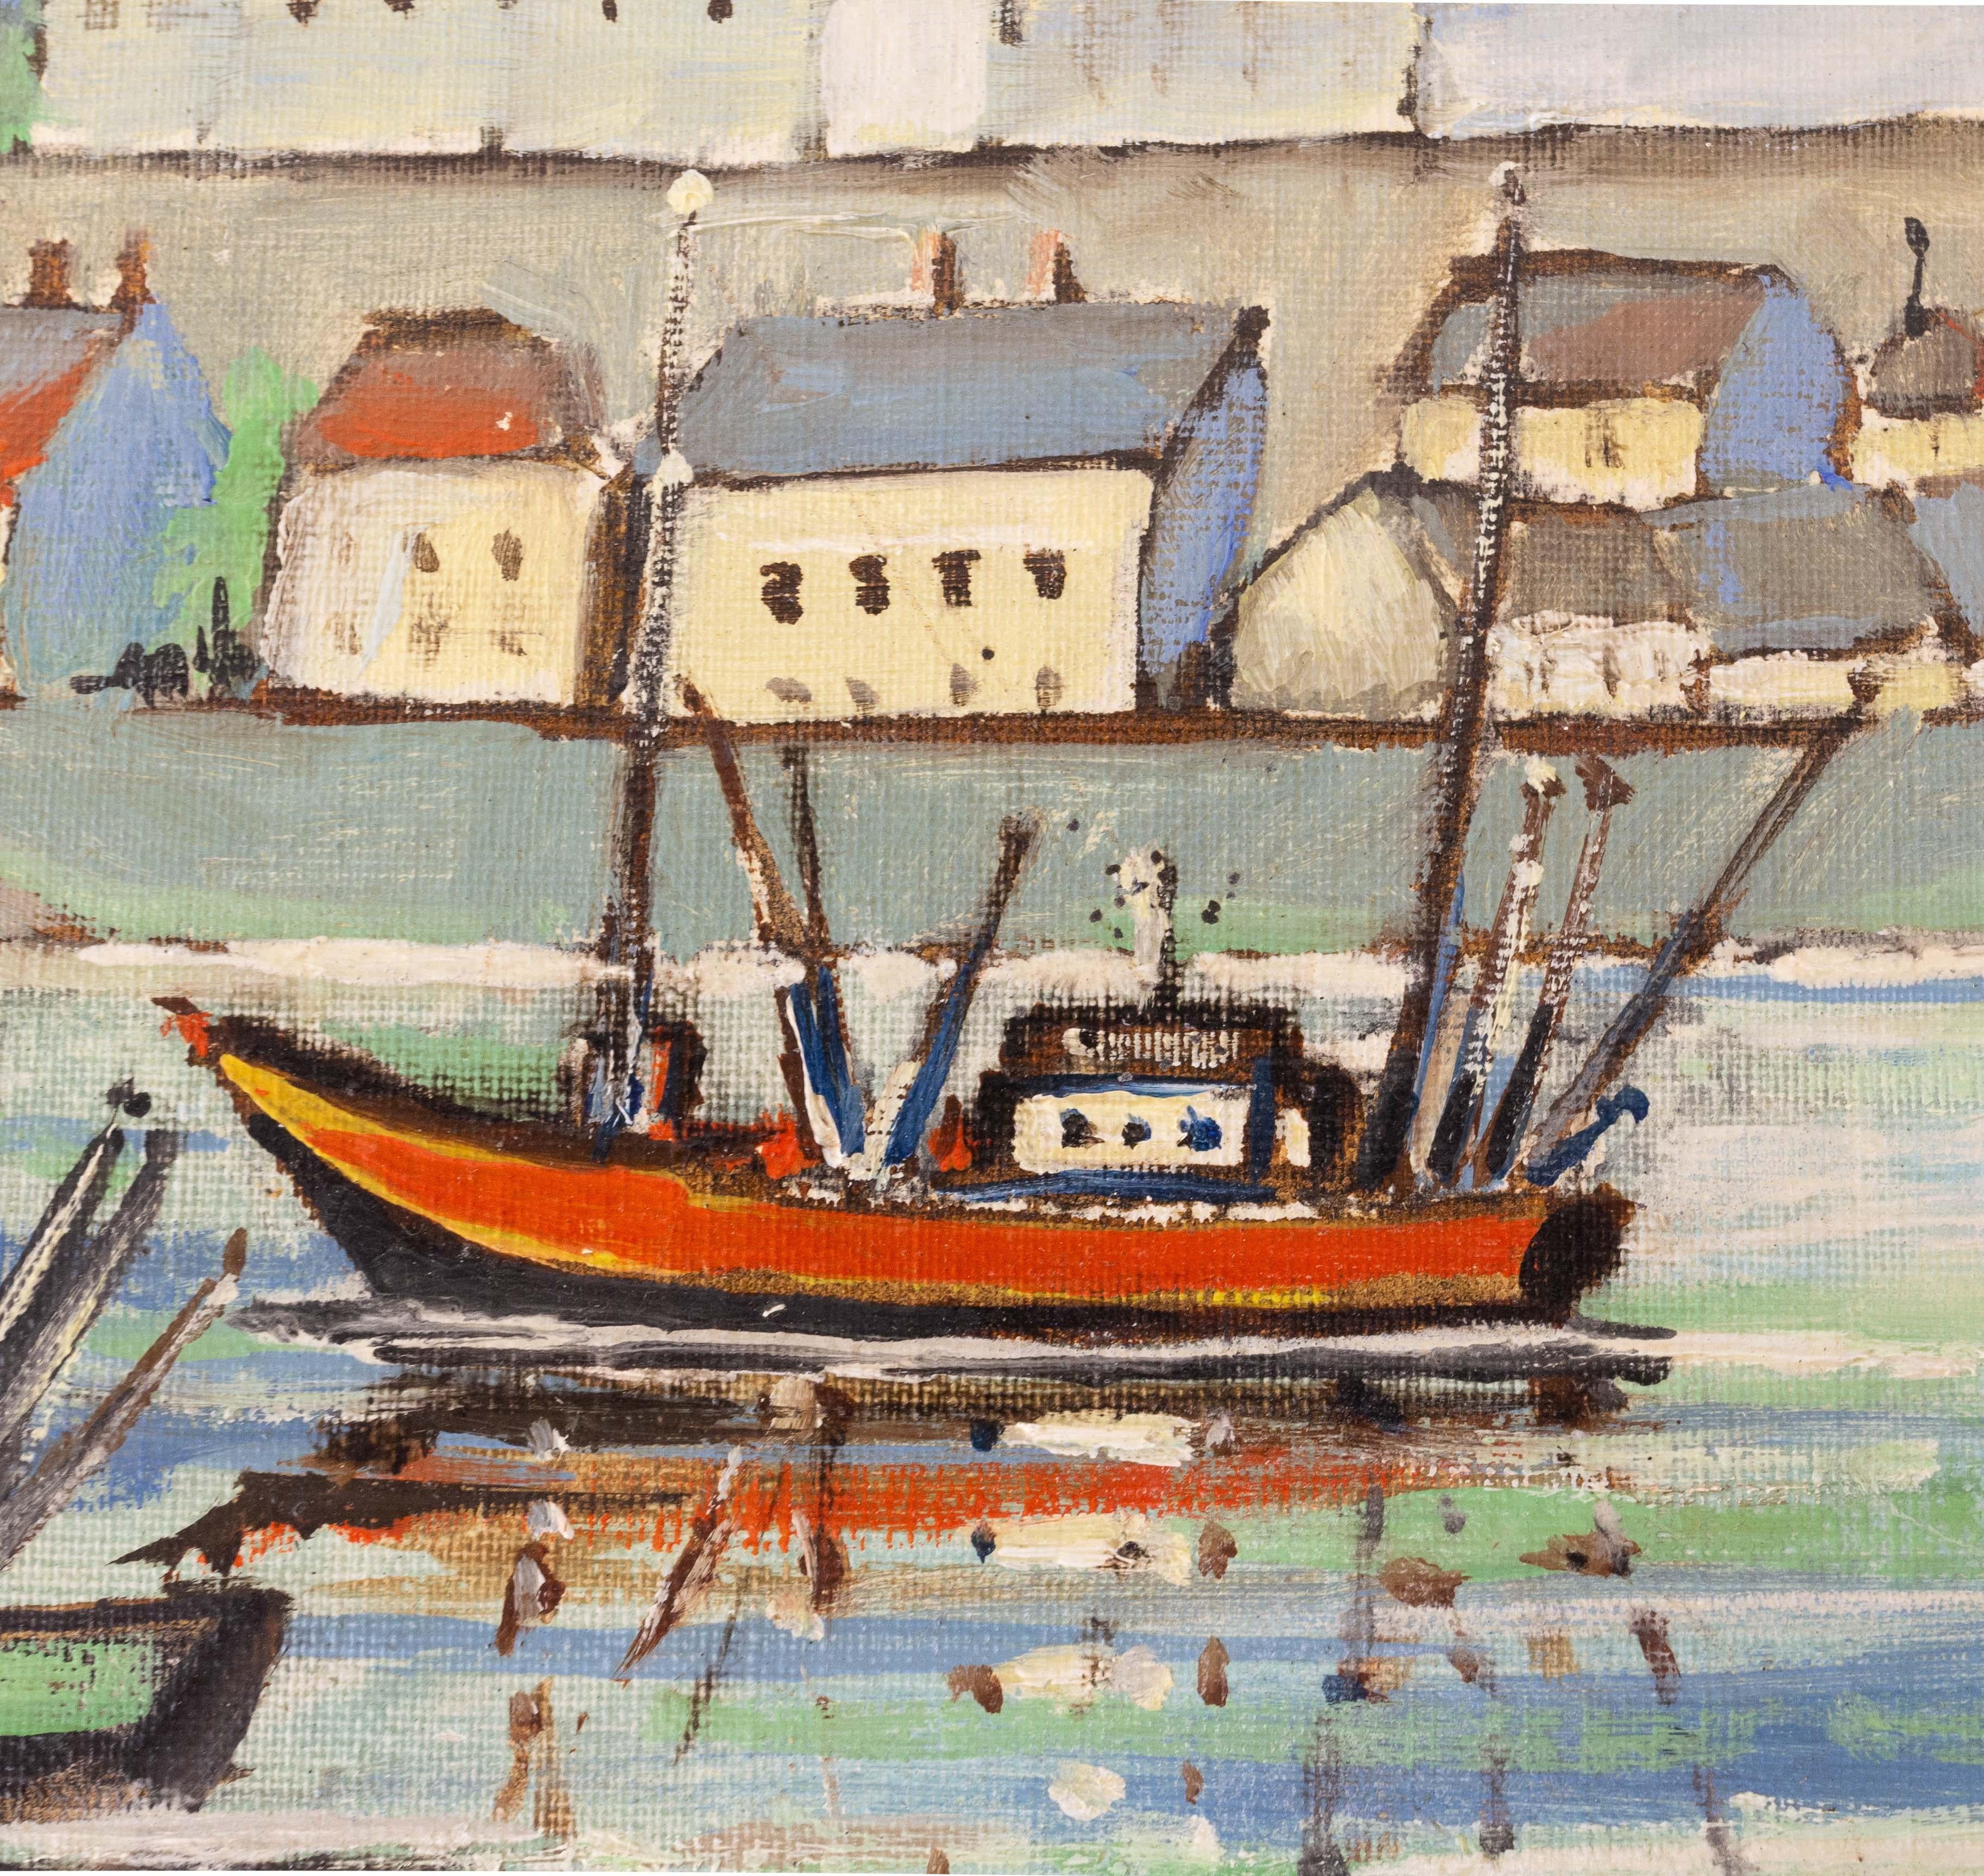 Hand-Painted Painting Oil on Canvas Representing a Britanny Port Signed Jean Kok, 1966 For Sale